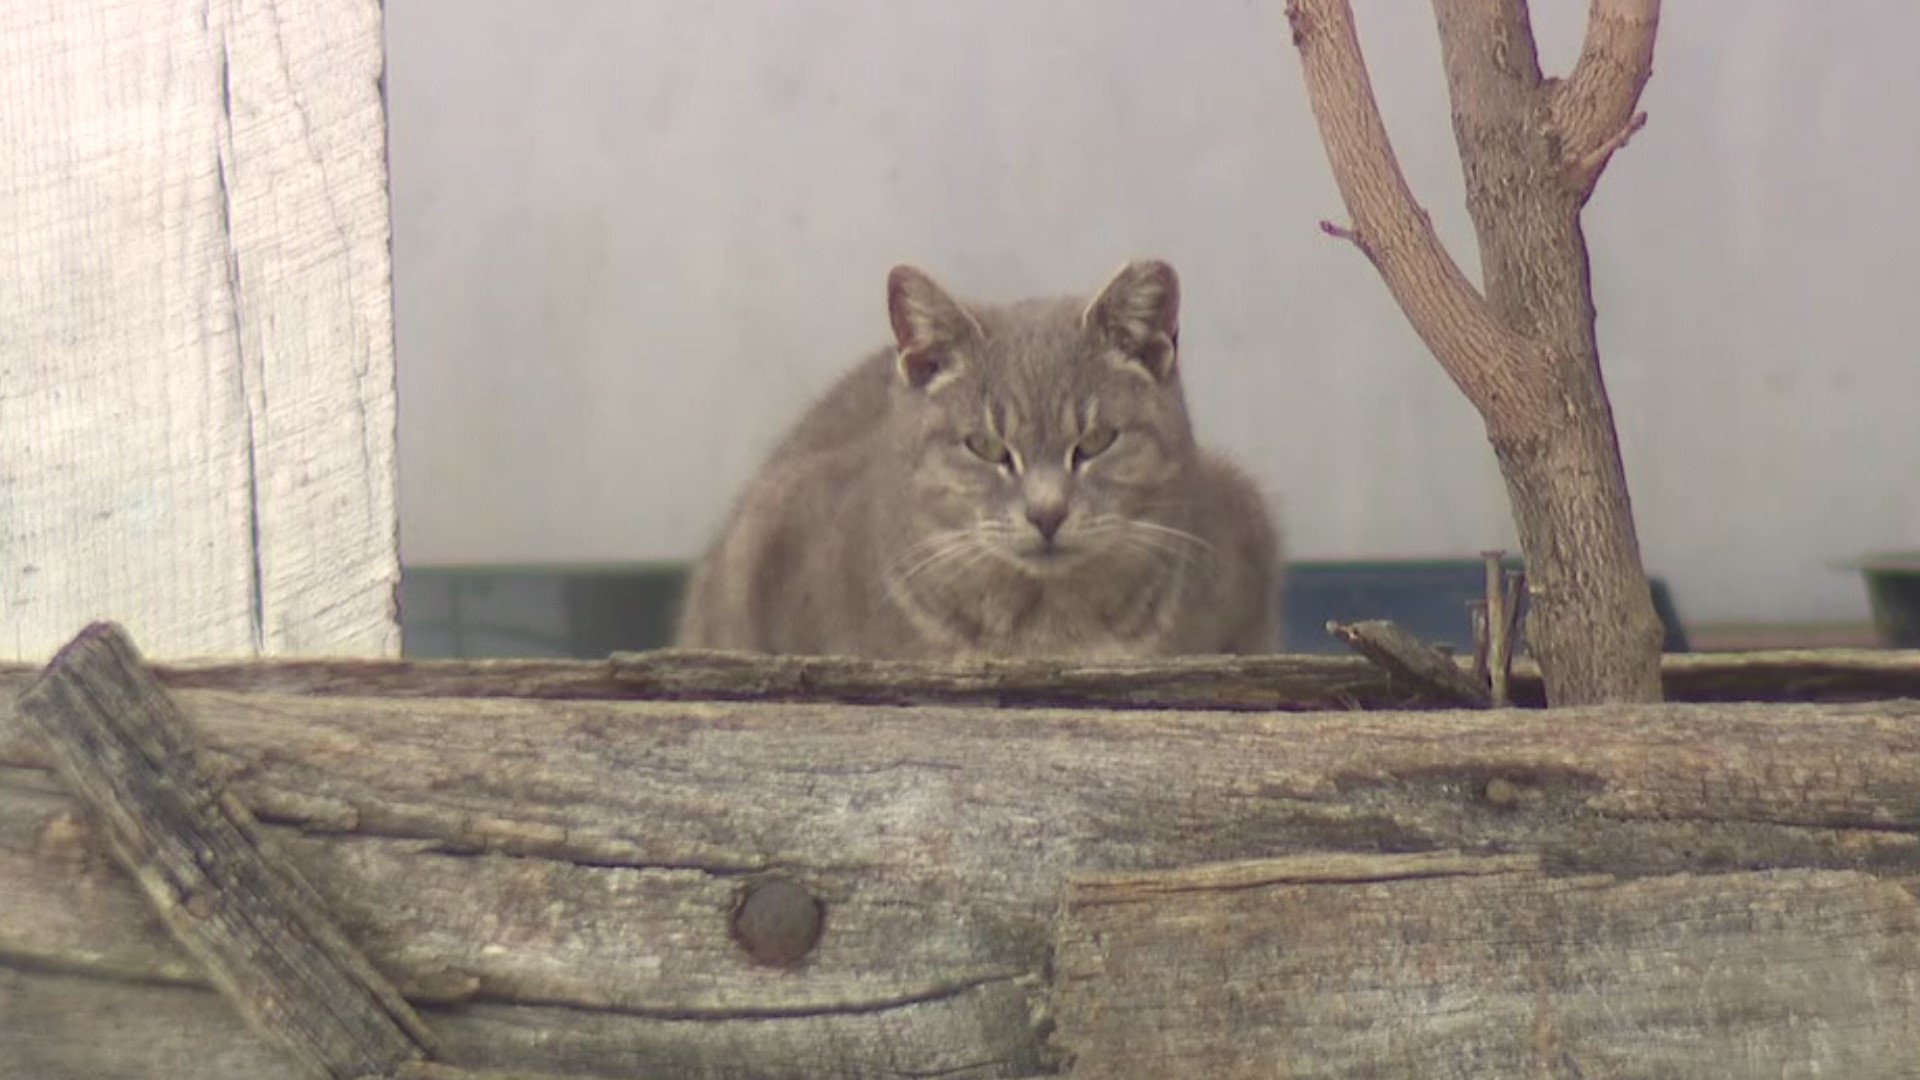 Catawissa officials are looking for volunteers to help with feral cat concerns.